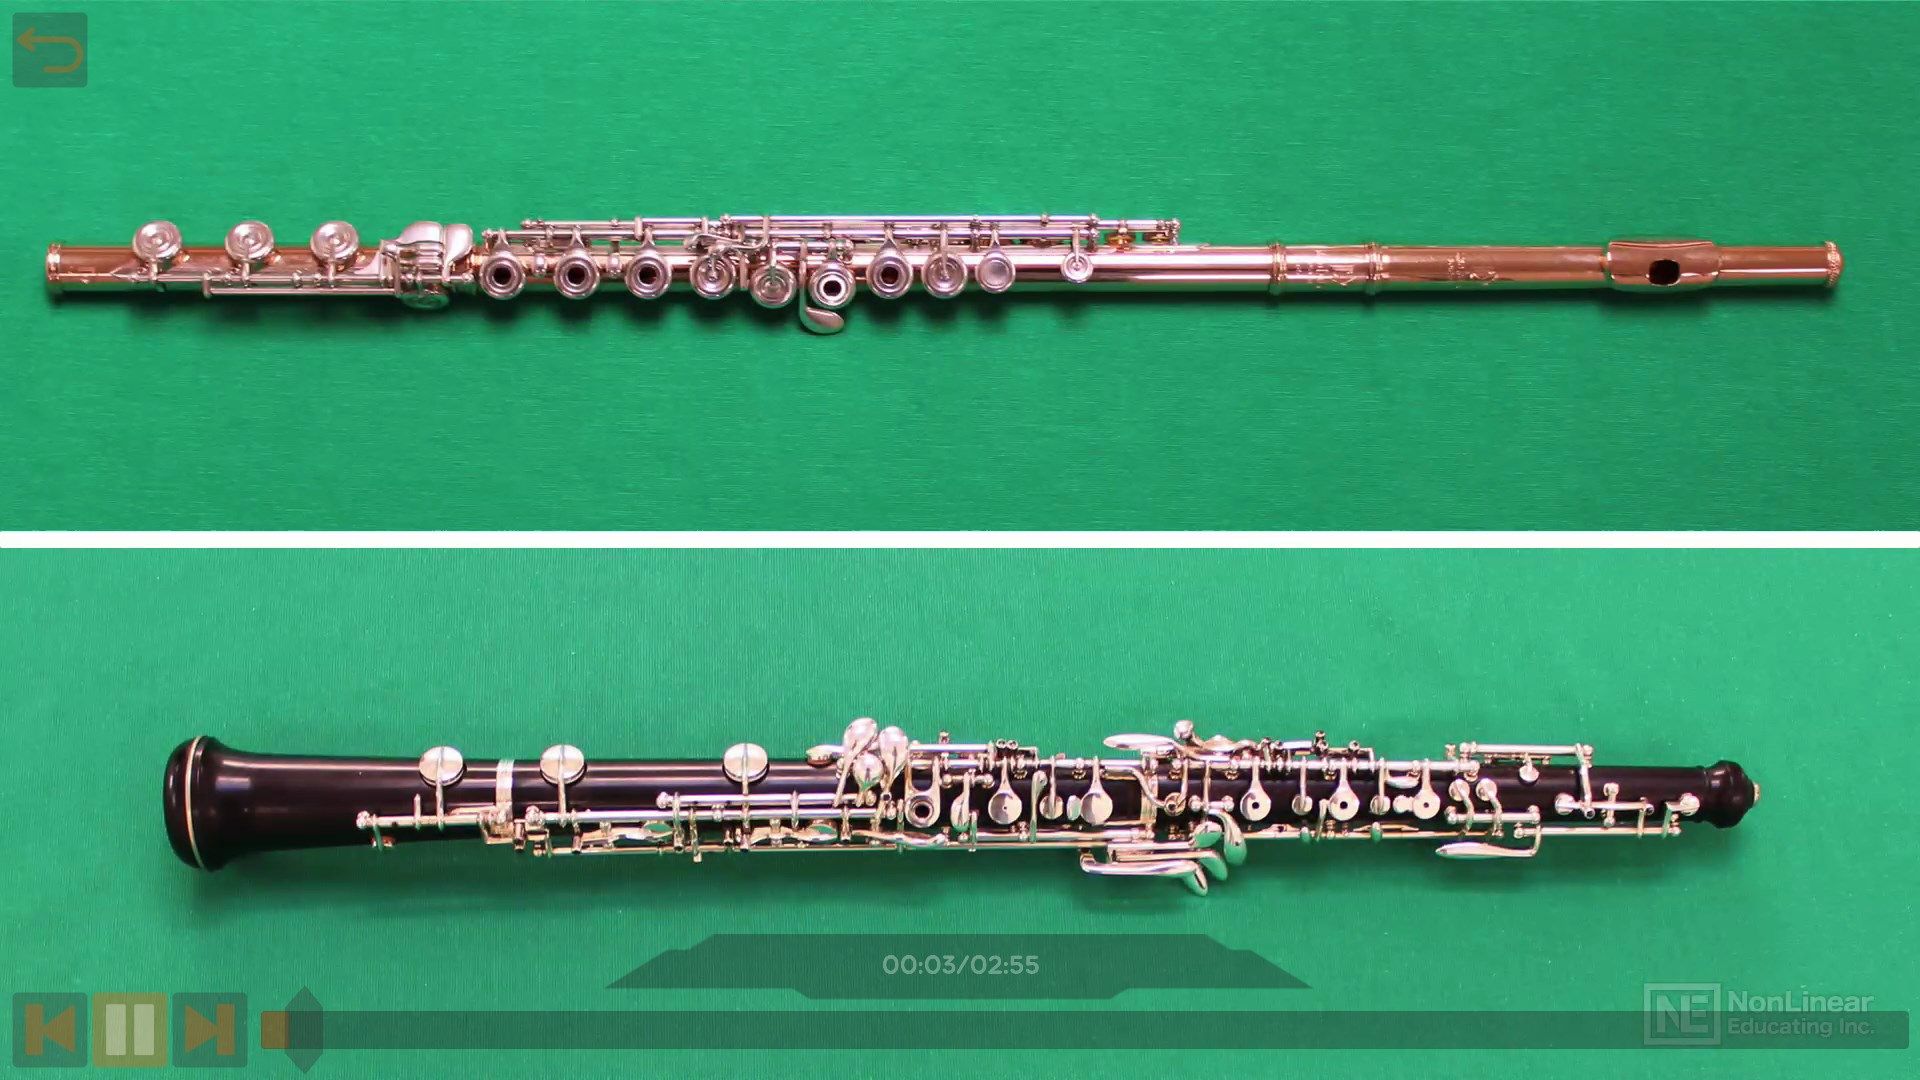 Flutes and Oboes Course by Ask.Video